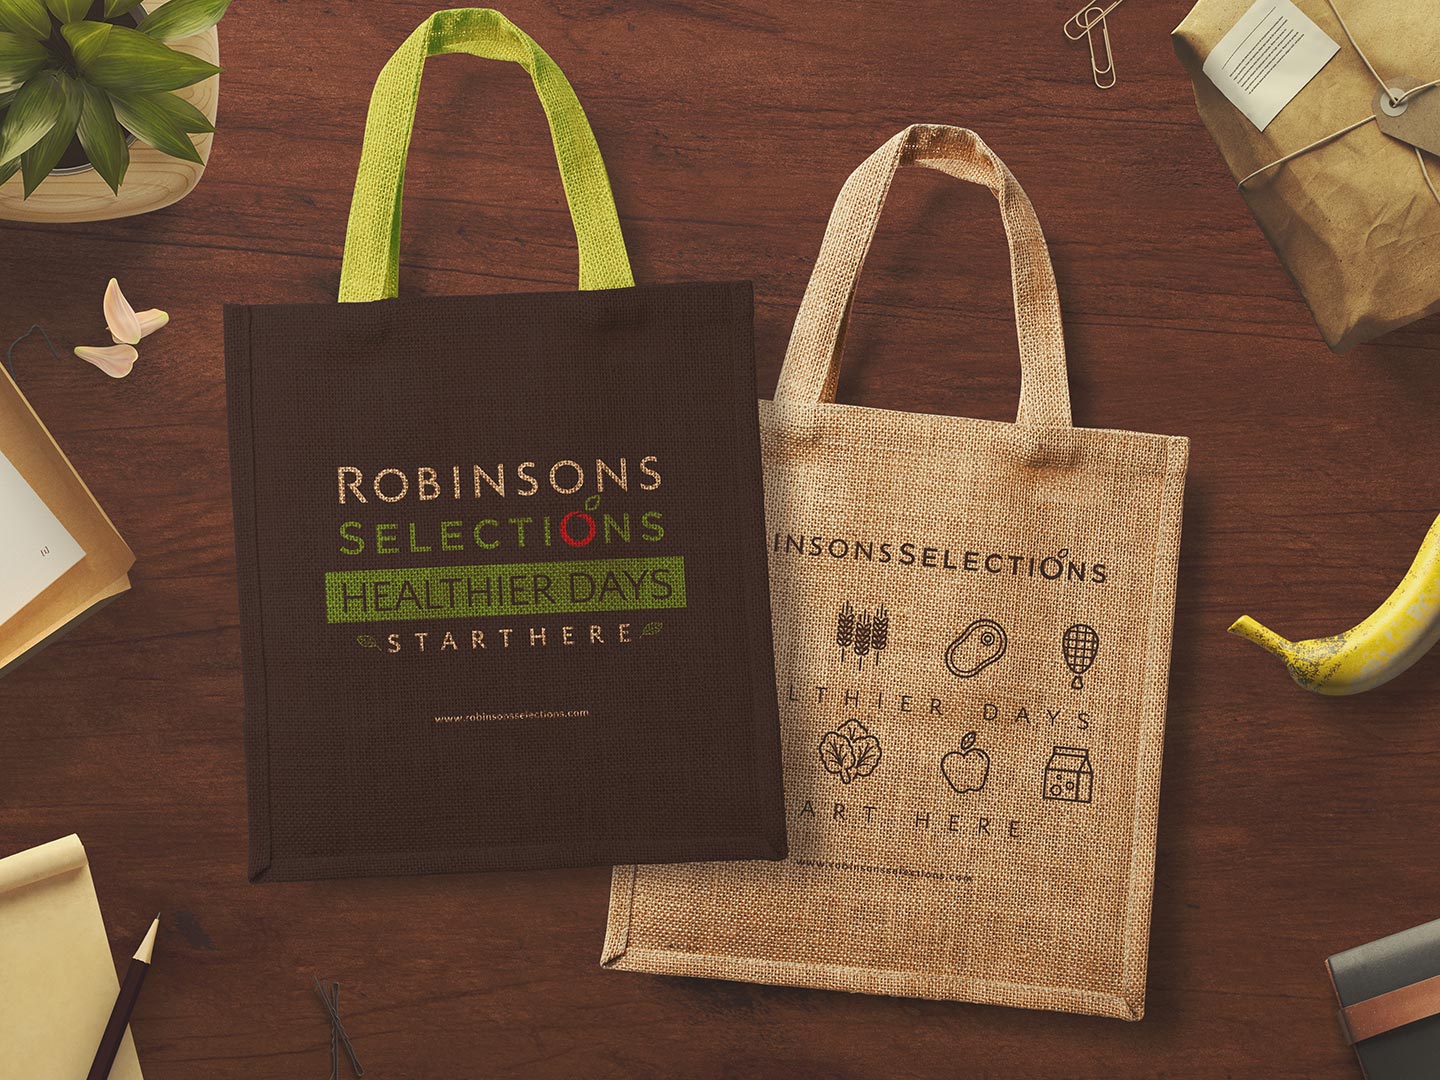 Robinsons Selections | Bluethumb | Brand Experience Design